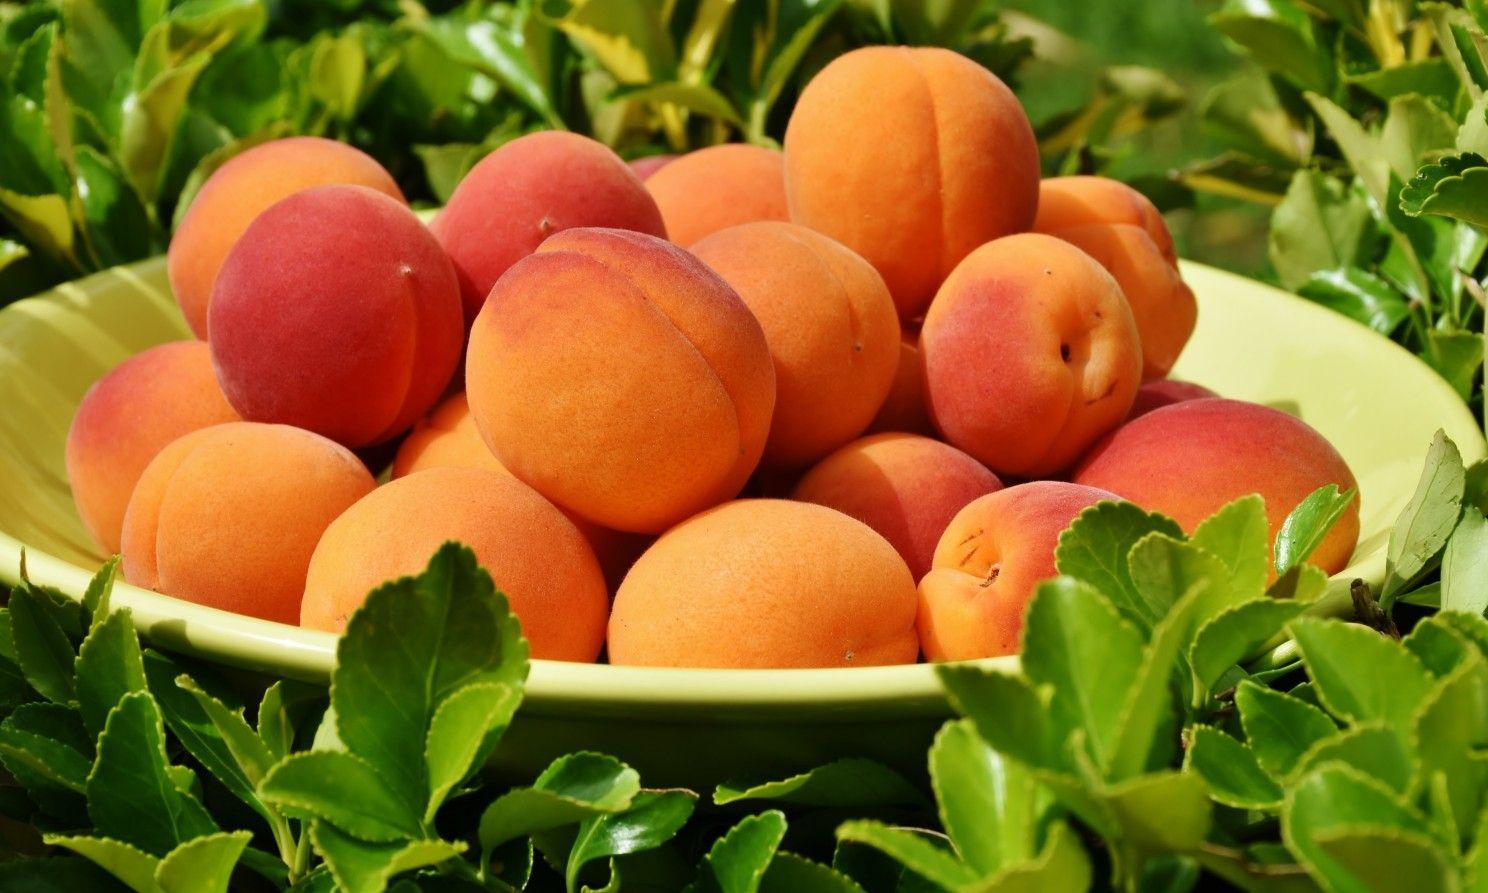 Download 1488x893 Apricot, Plate, Leaves, Fruits Wallpaper